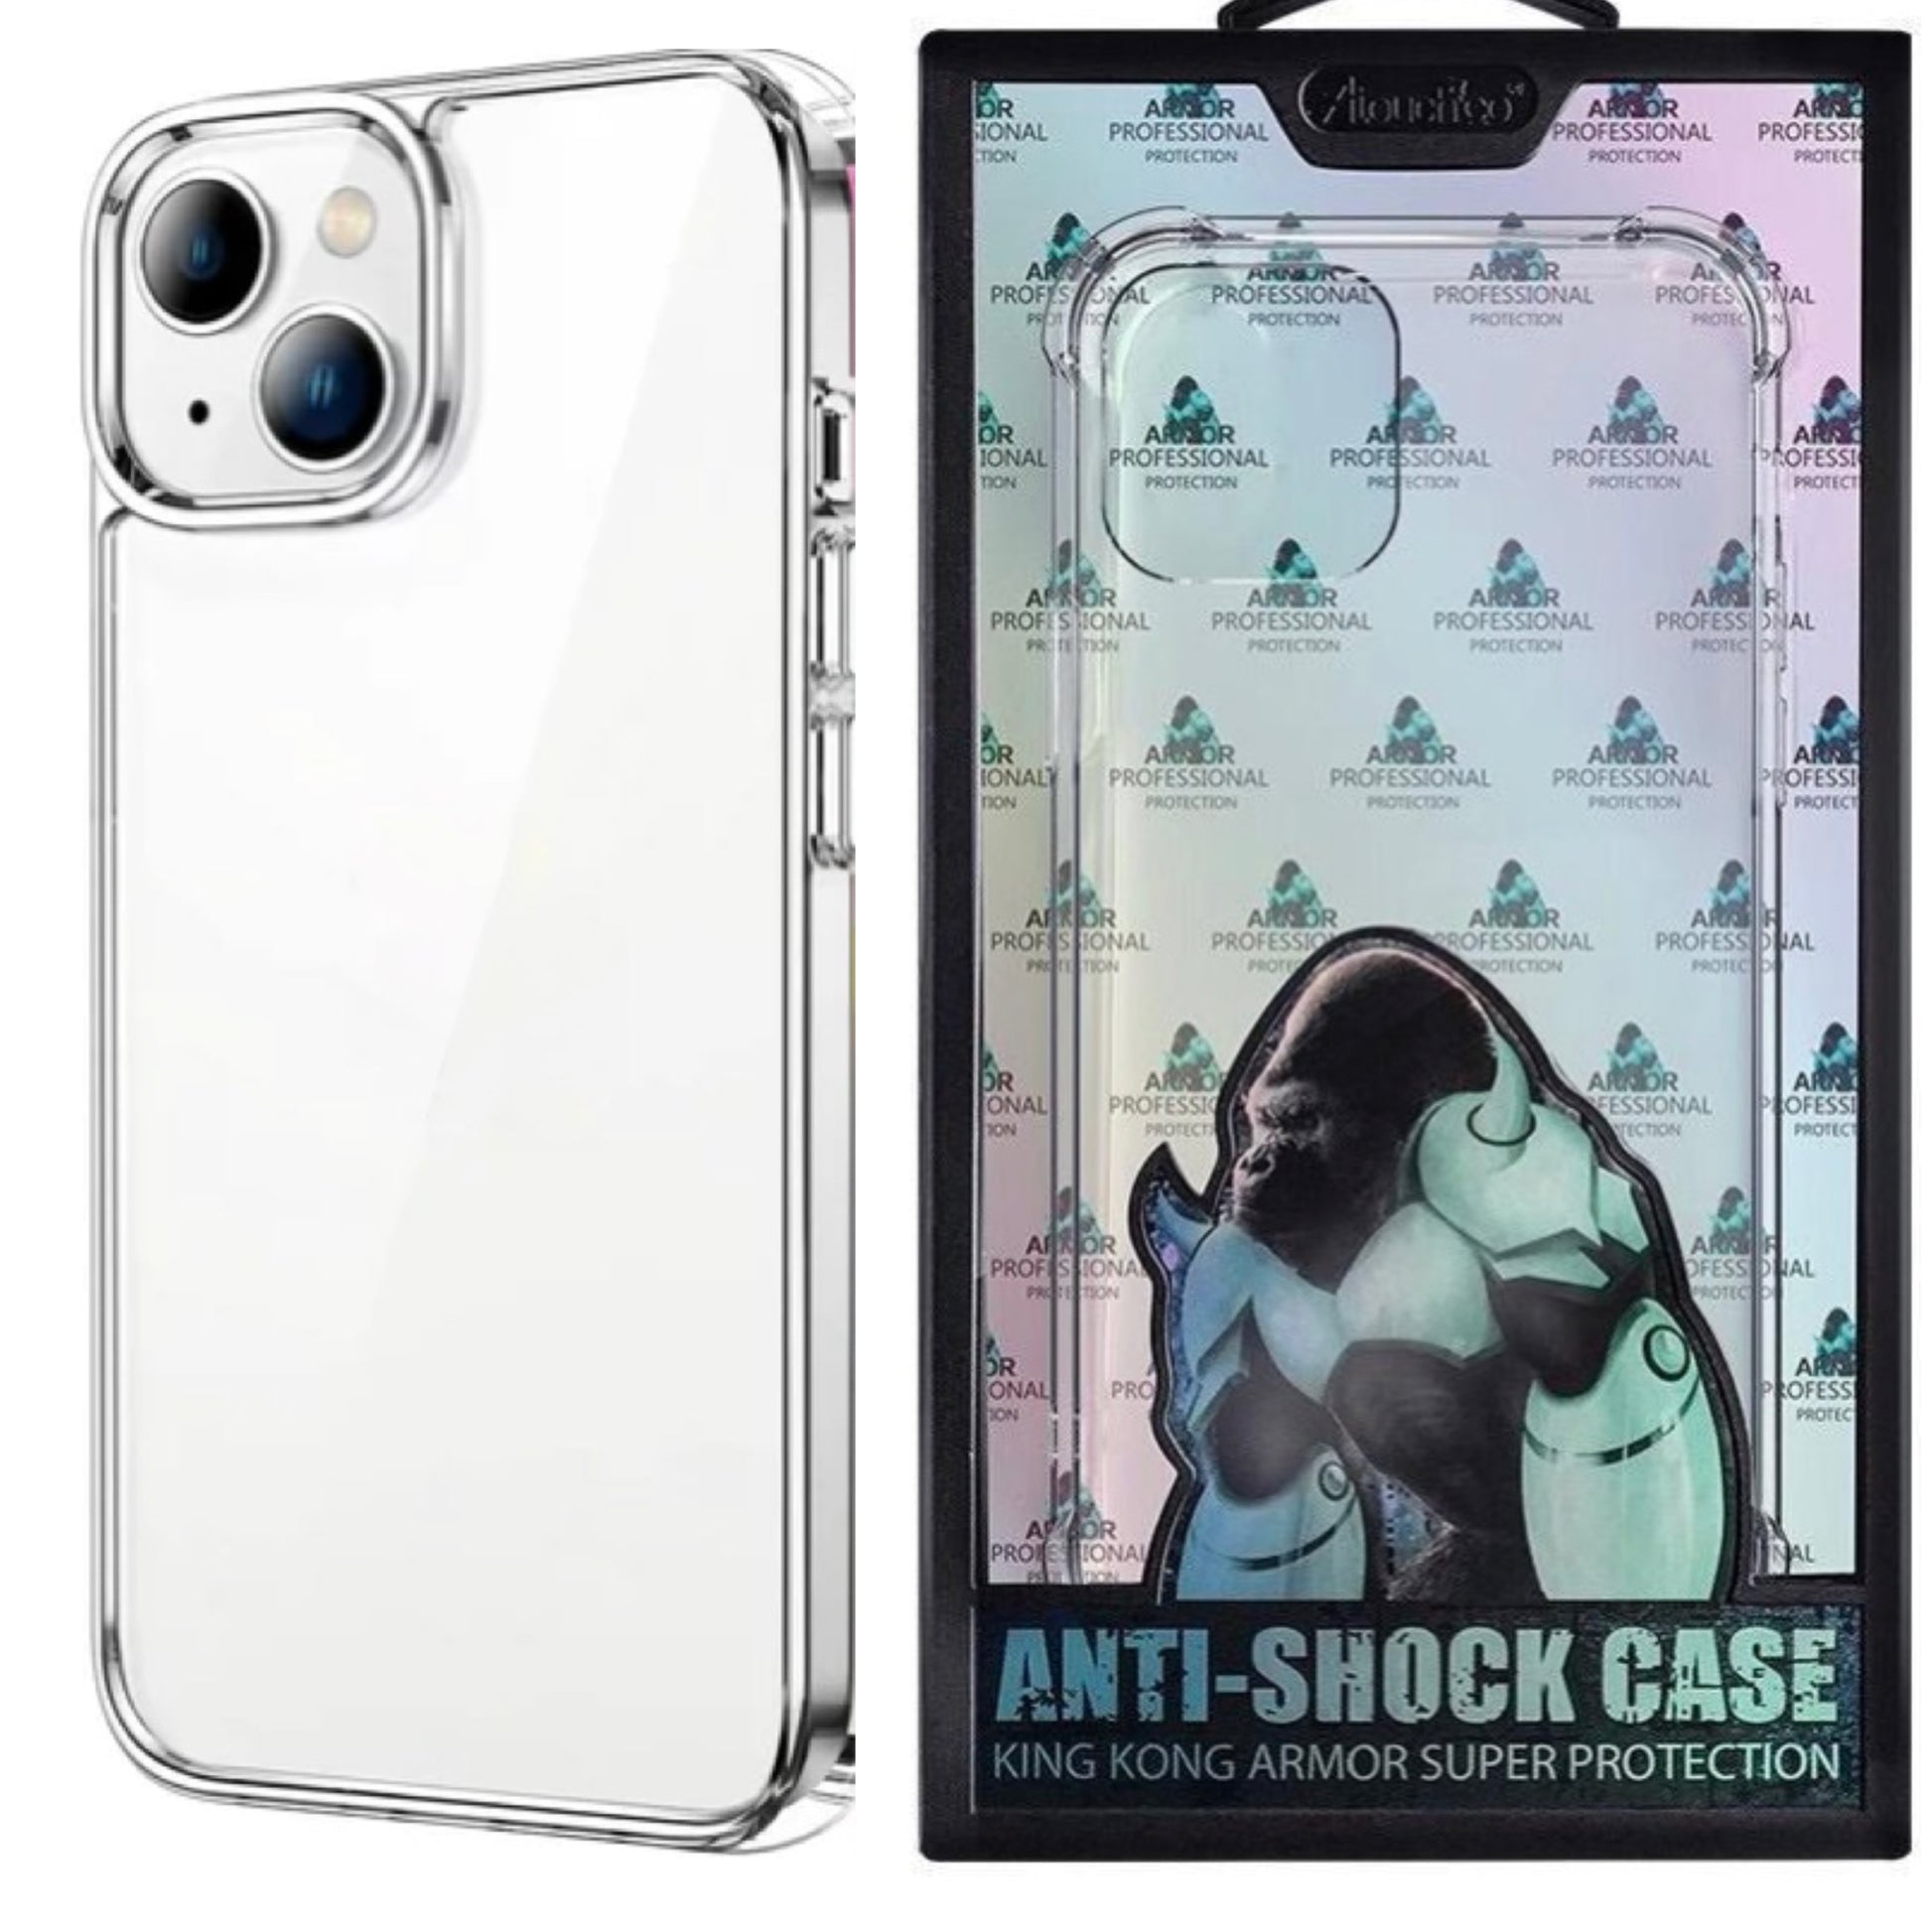 Cases for iPhone 14 saynama